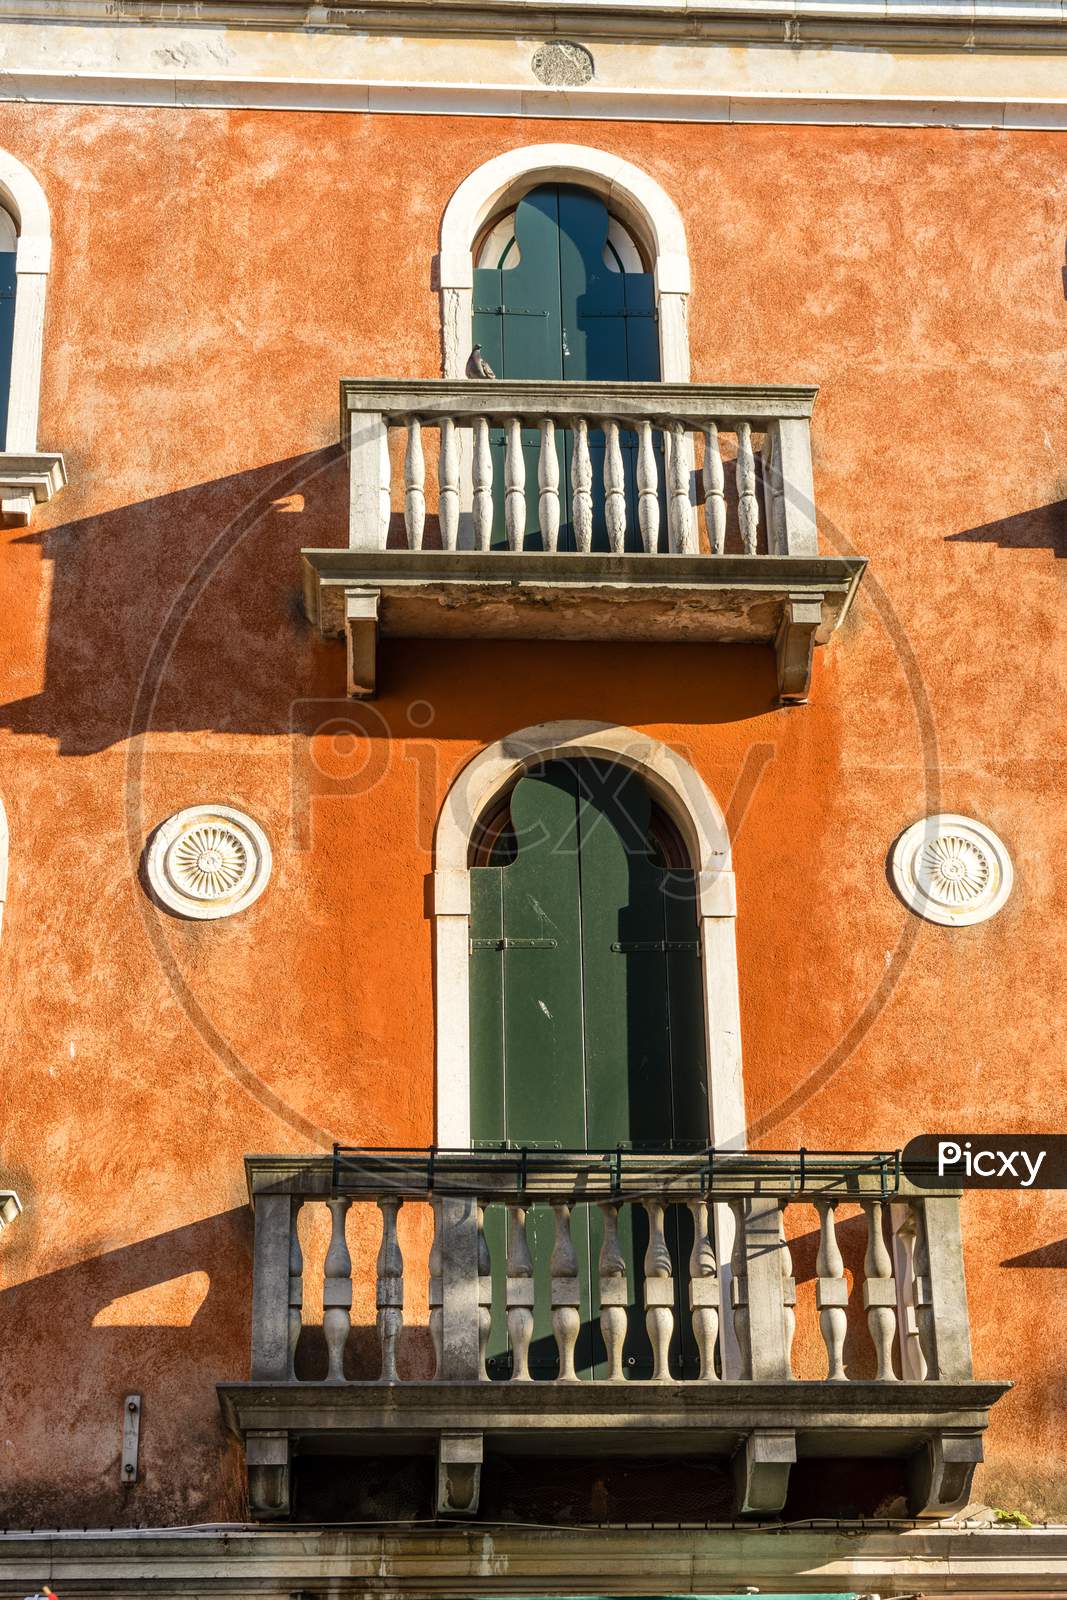 Italy, Venice, A Bench In Front Of A Brick Building